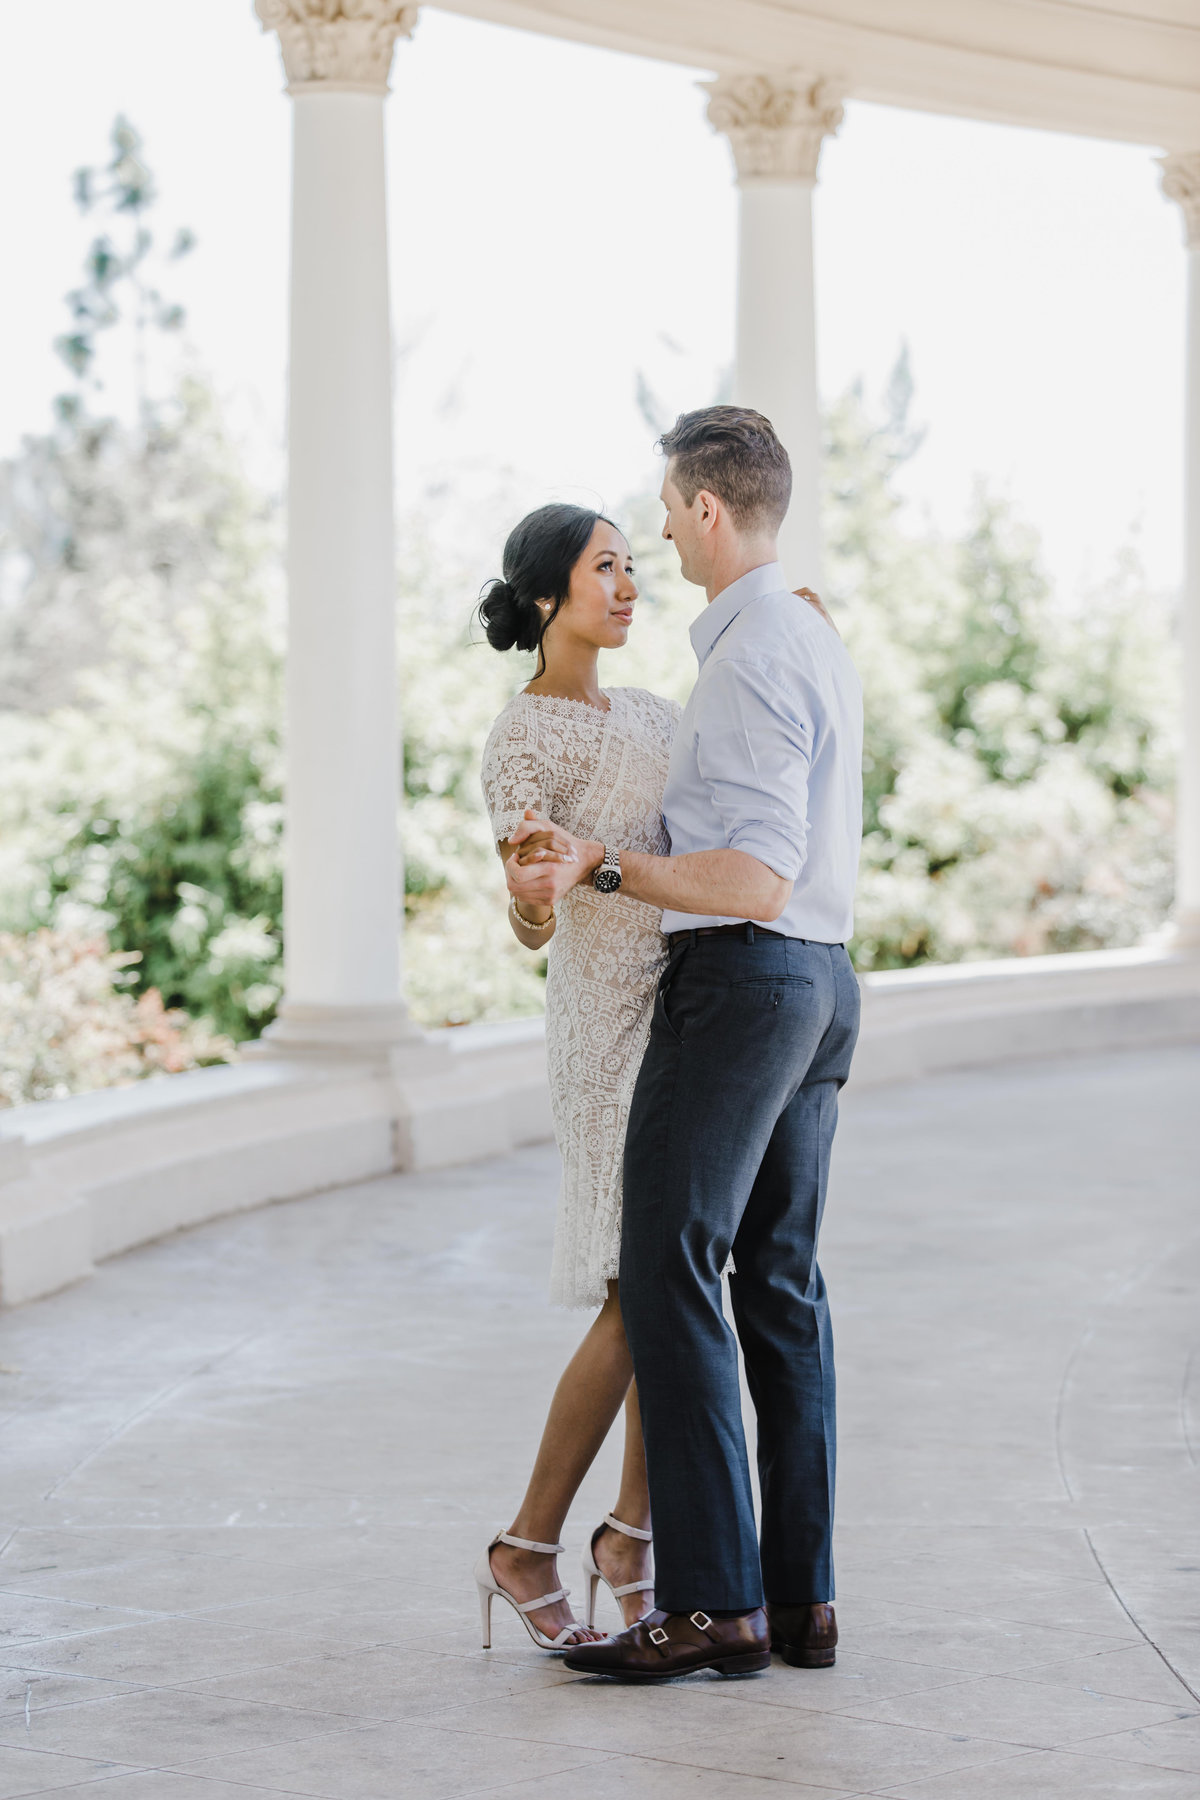 Engagement Session at Balbo Park, San Diego. Photography by Jessica Jaccarino Photography.